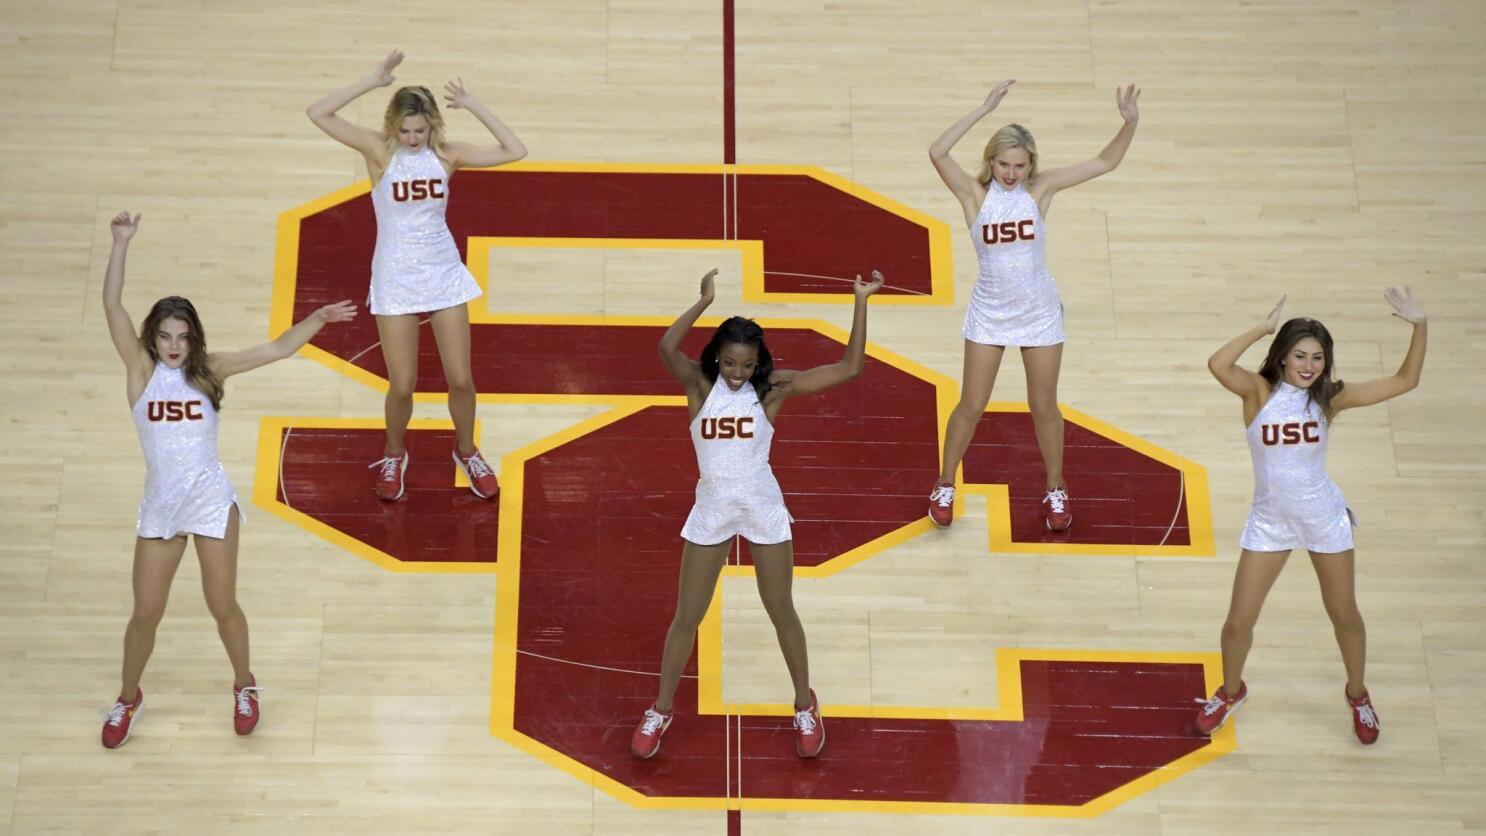 NBA Teams Are Eliminating All-Female Dance Squads